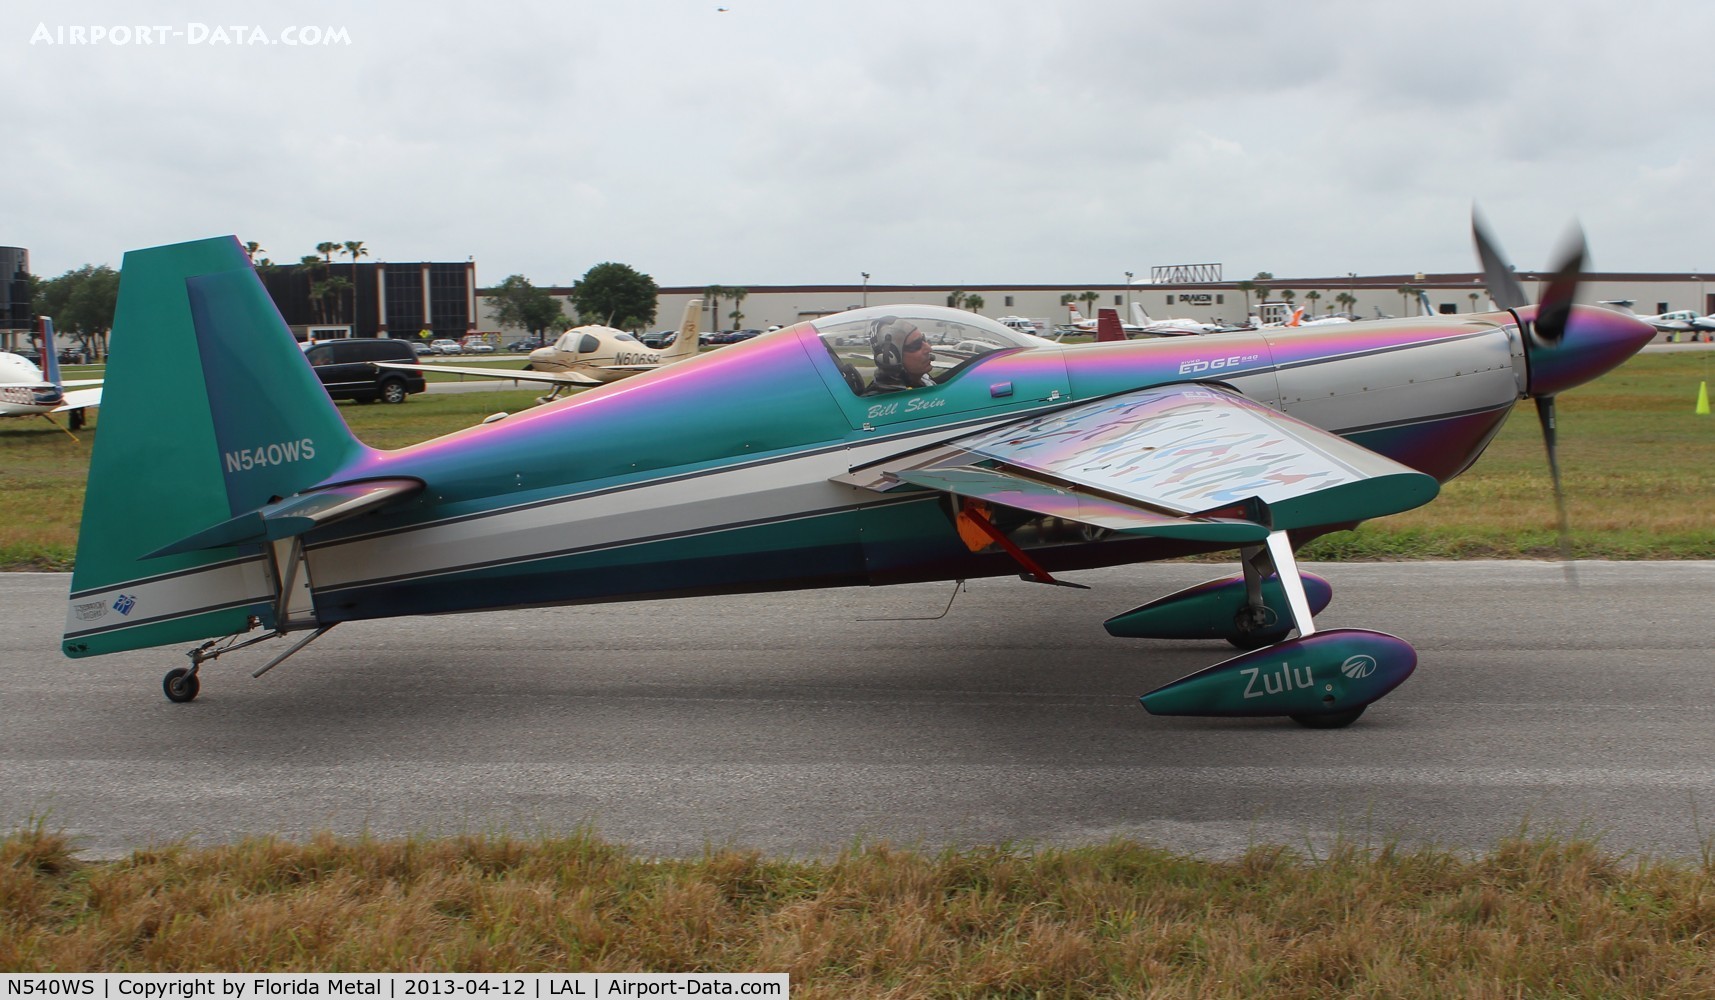 N540WS, 2002 Zivko Edge 540 C/N 0032, Bill Stein Aerosports Edge 540 changes from purple to green as it moves by